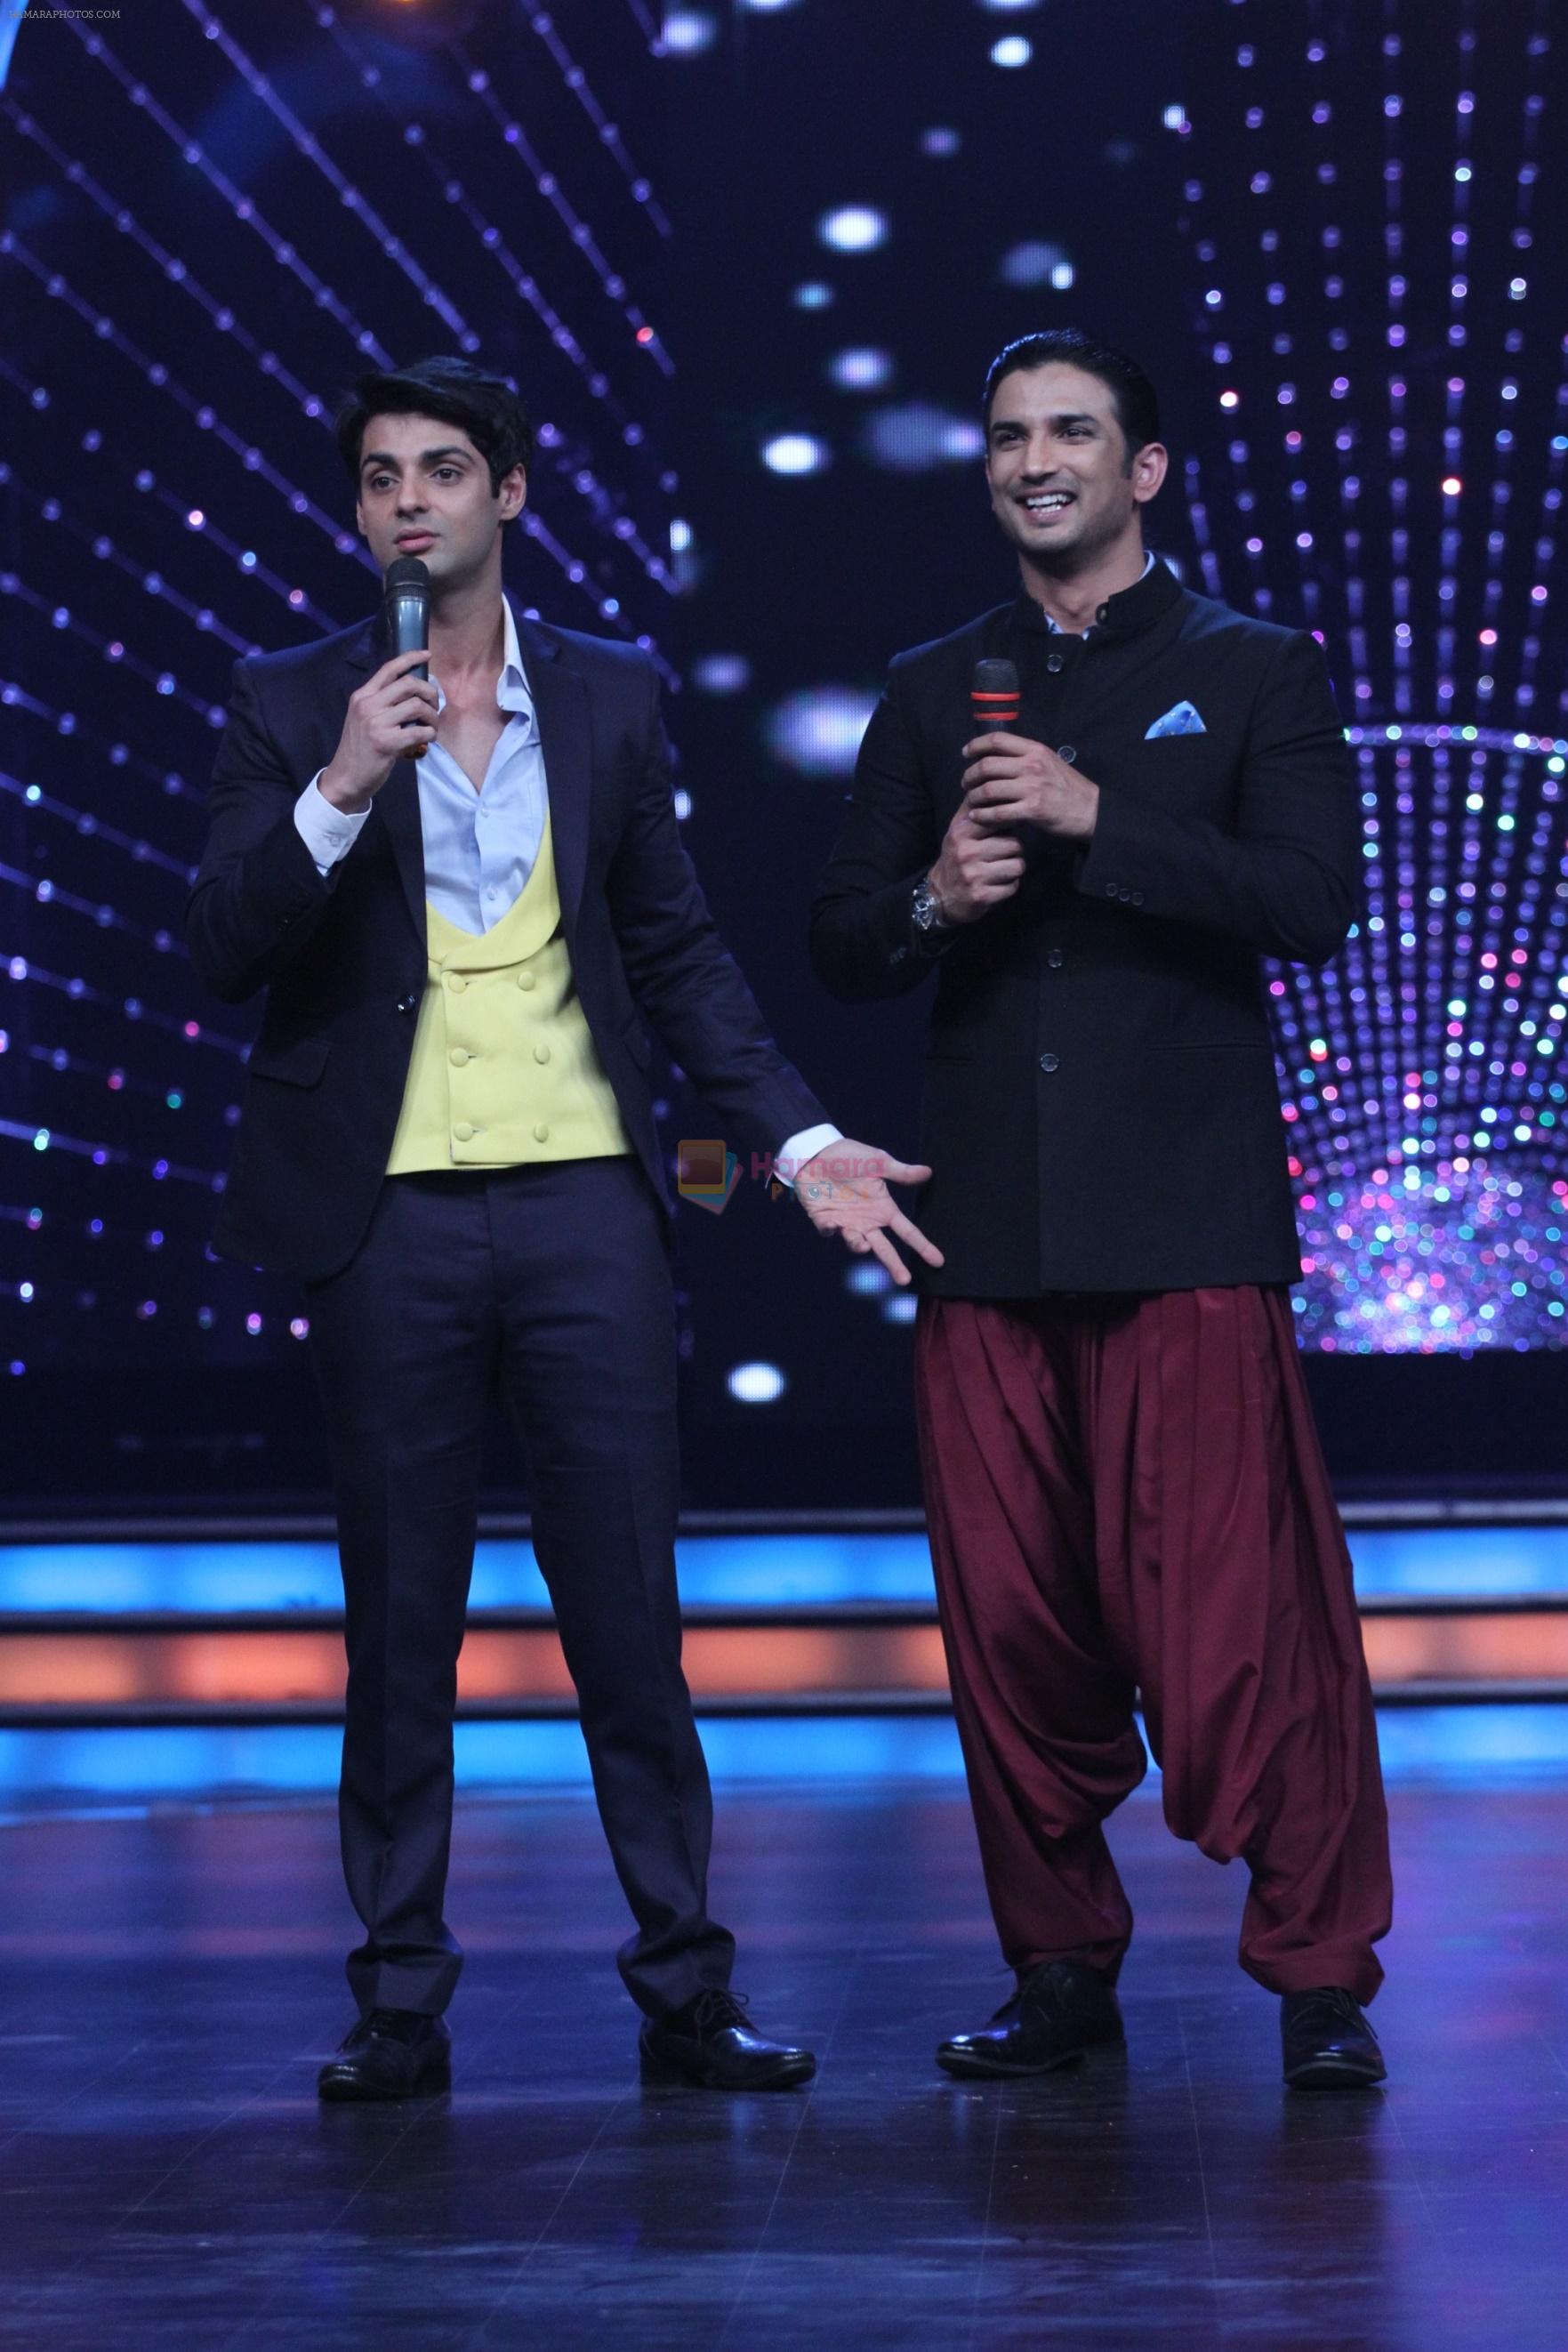 Sushant Singh Rajput on the sets of Zee TV DID Super Moms to promote his upcoming movie on 31st March 2015